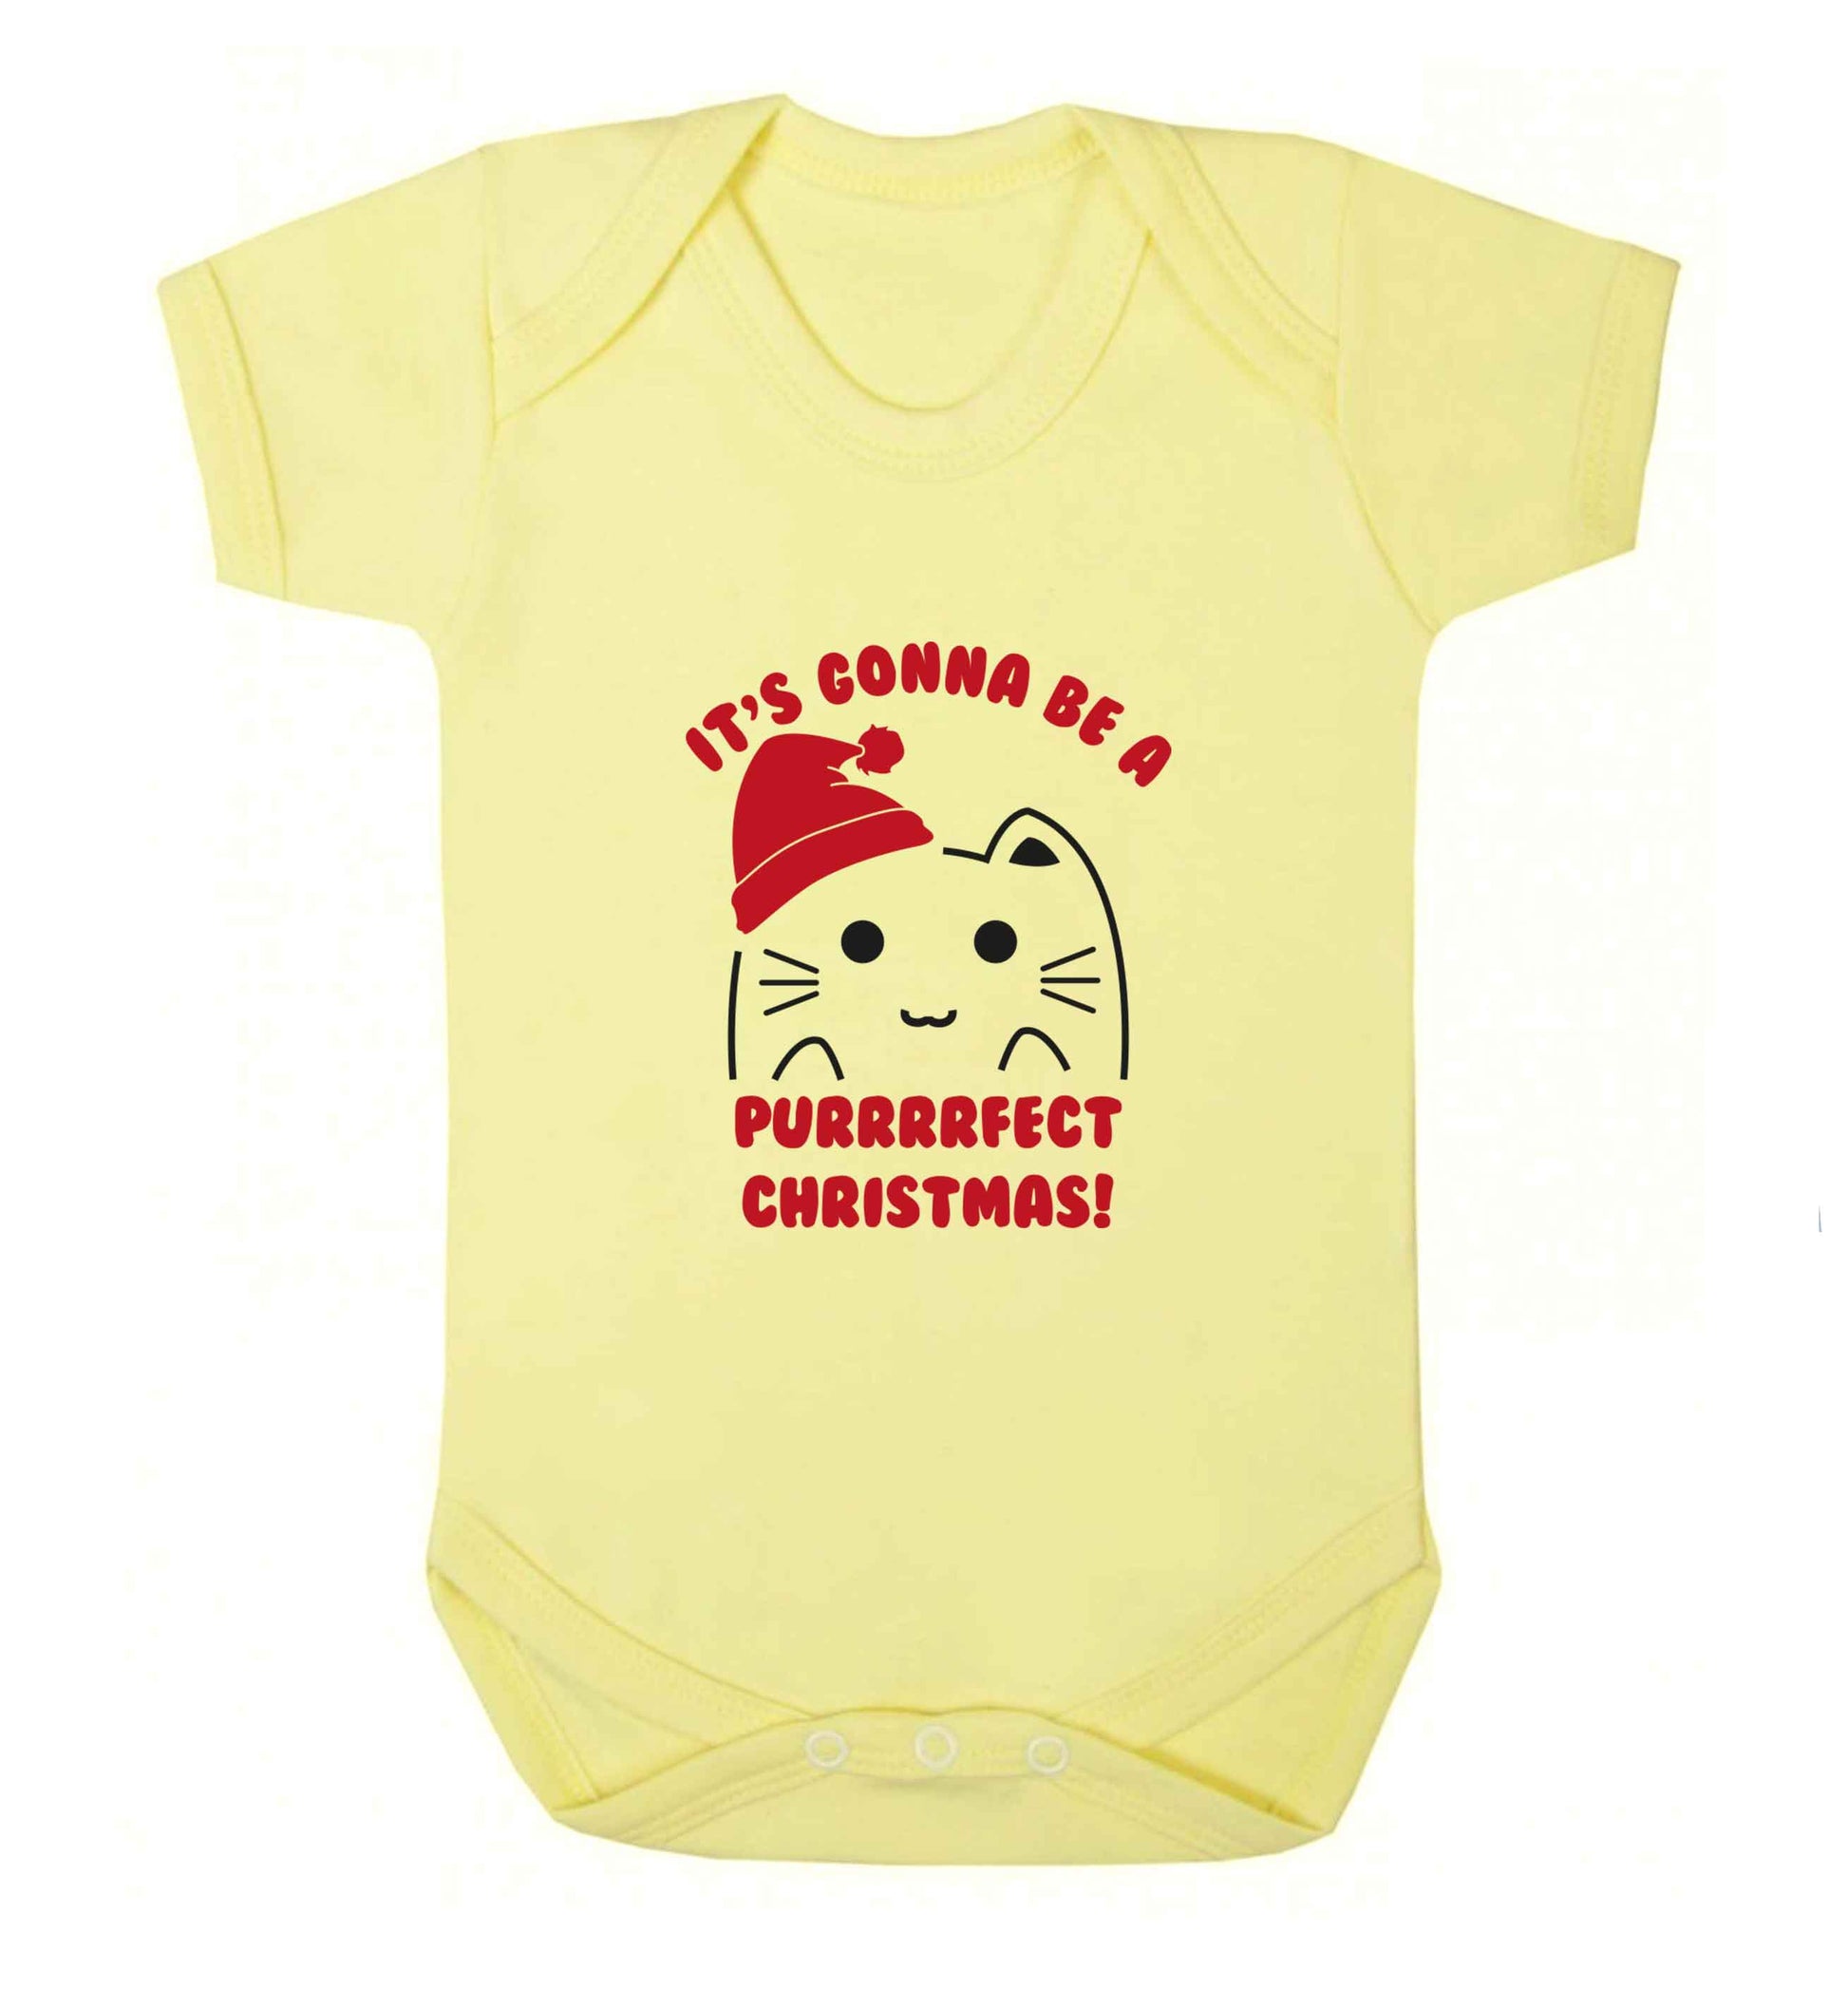 It's going to be a purrfect Christmas baby vest pale yellow 18-24 months